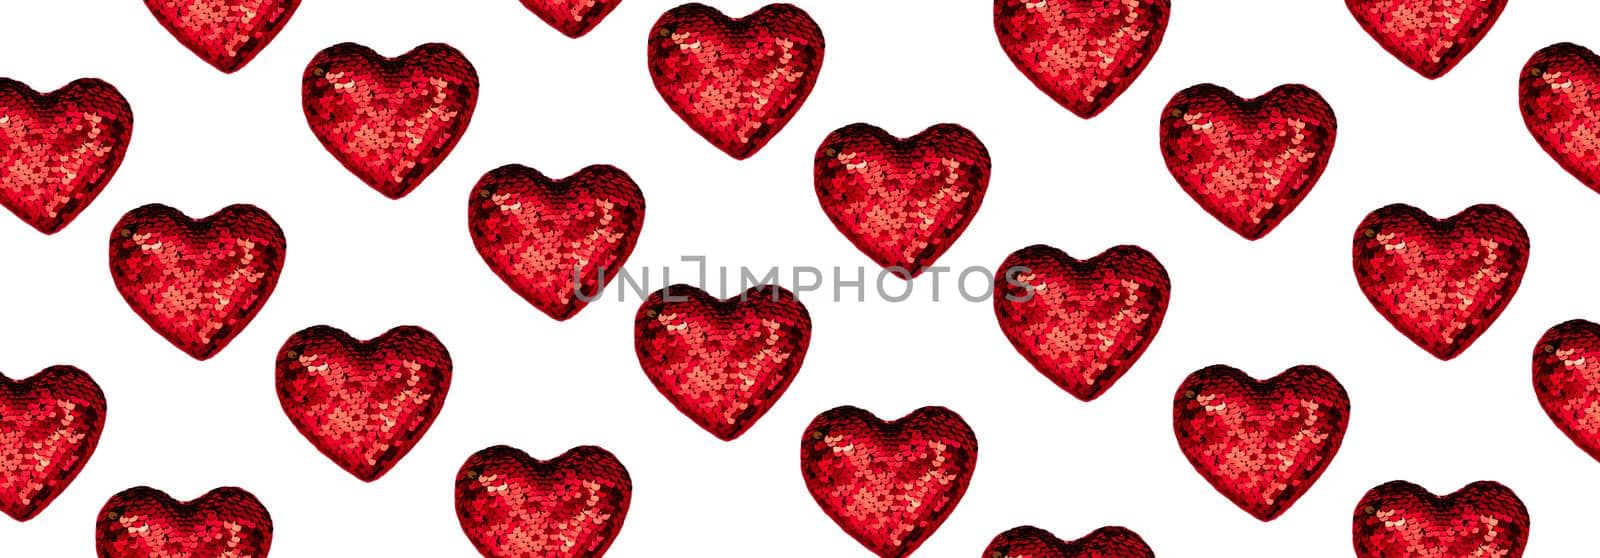 Christmas or Valentines composition made from glowing red heart decoration and glitter on pink surface. Merry christmas and happy 2021 New Year, Happy Valentine concept. Flat lay, top view, banner